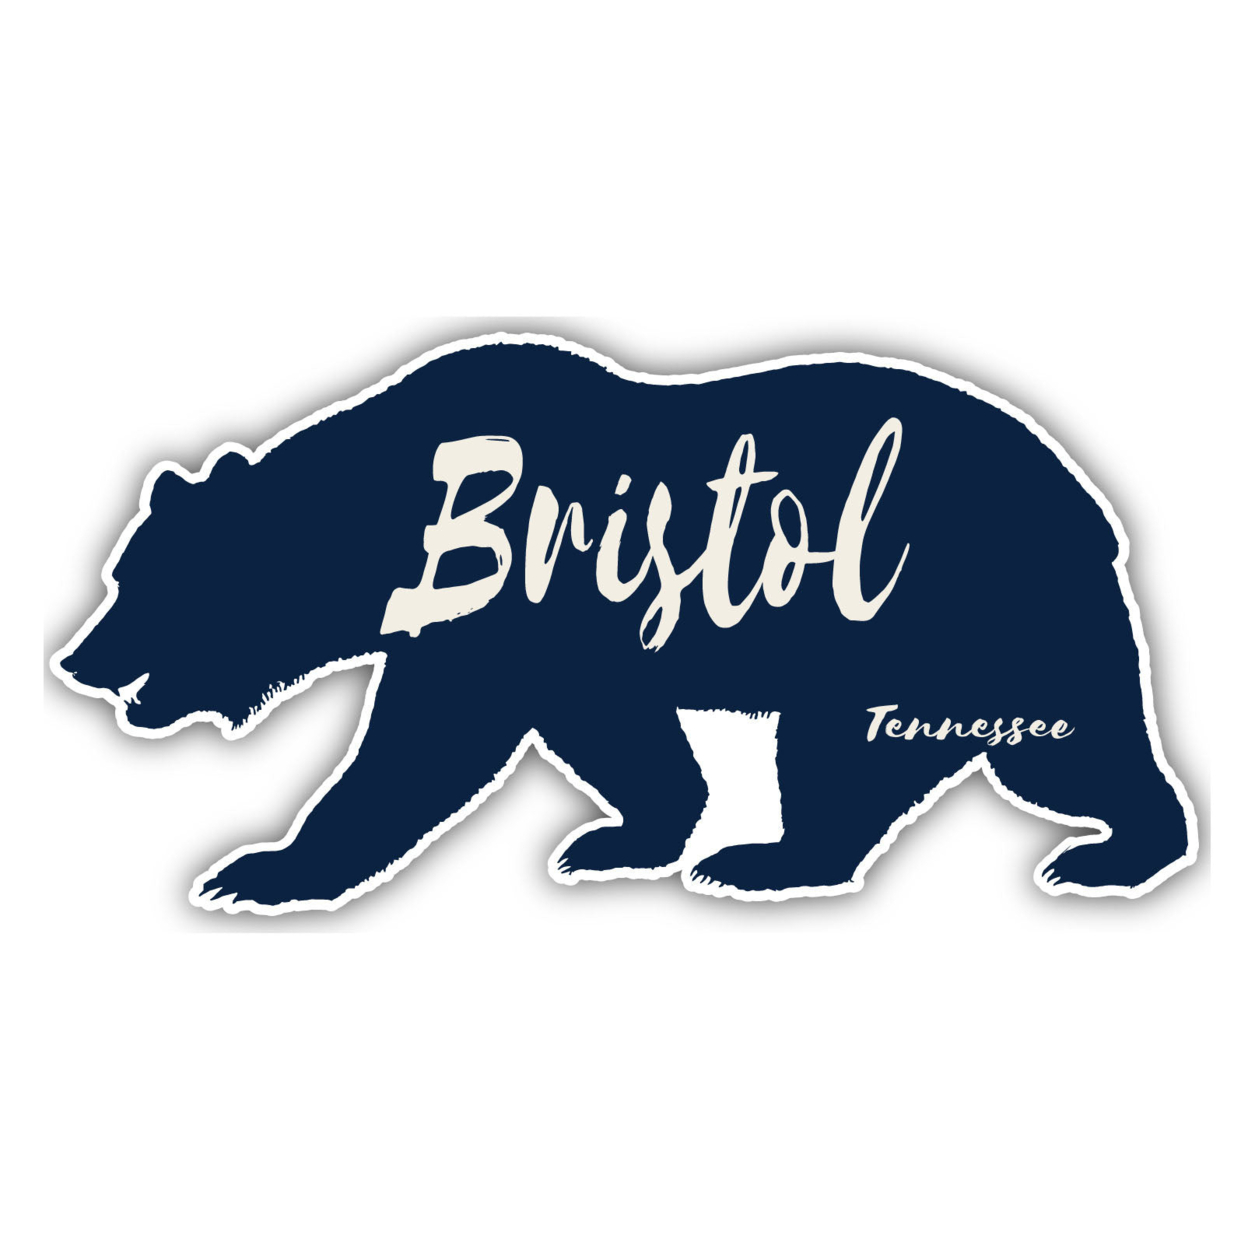 Bristol Tennessee Souvenir Decorative Stickers (Choose Theme And Size) - 4-Pack, 8-Inch, Adventures Awaits